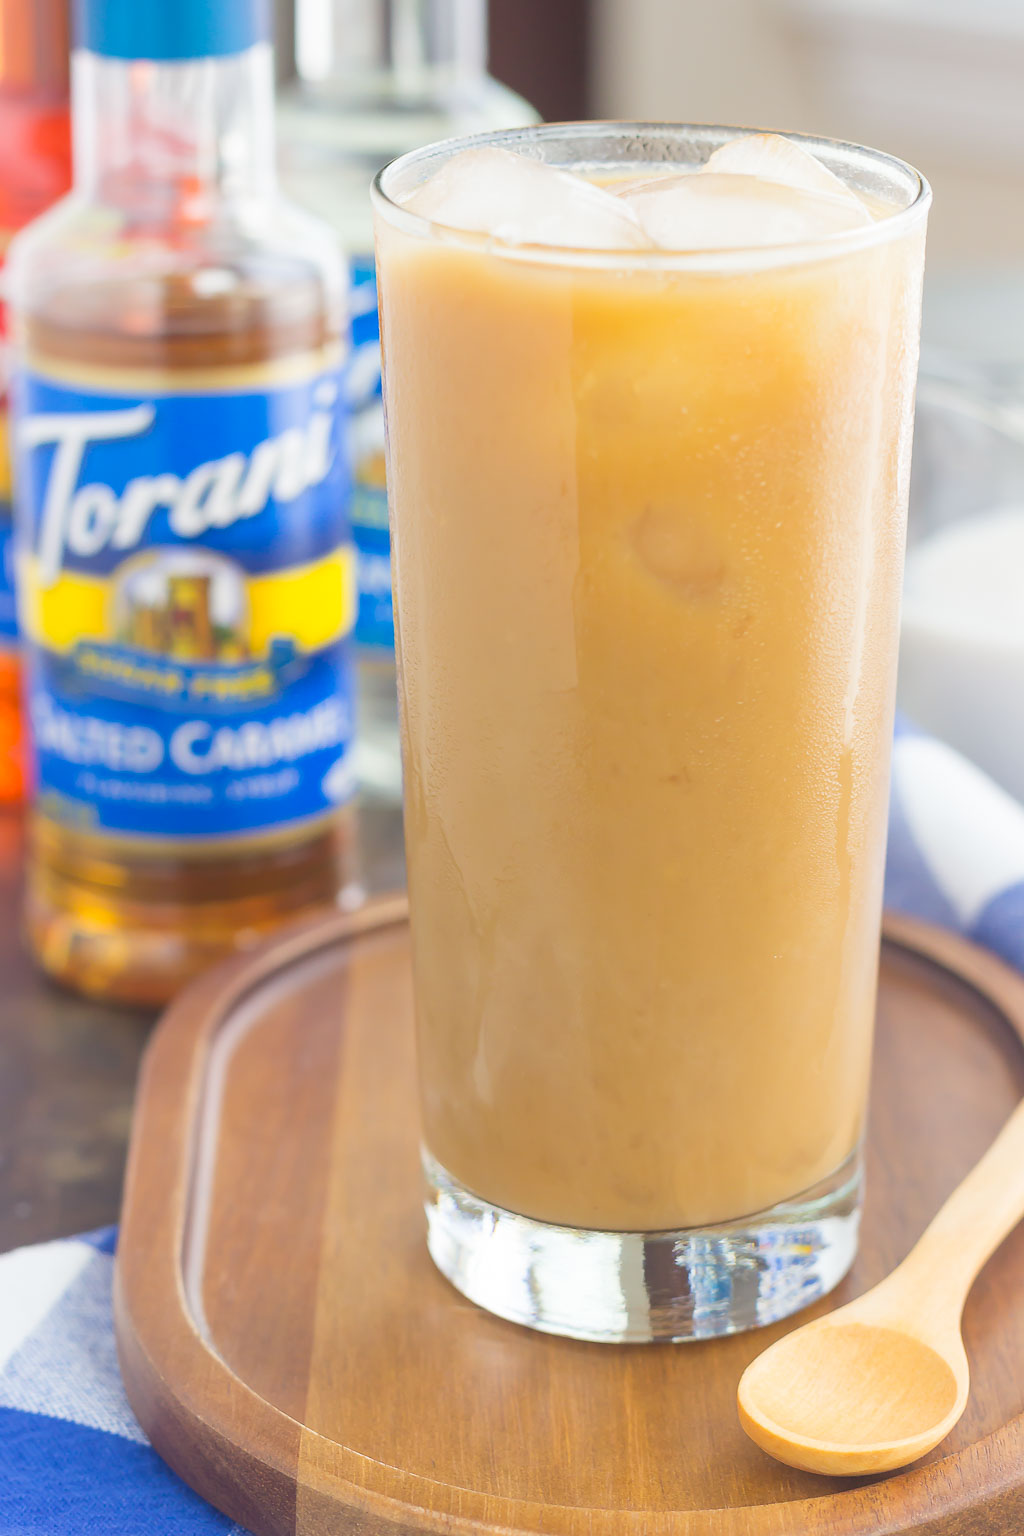 This Salted Caramel Almond Iced Coffee is an easy, three ingredient drink to beat the summer heat. Bold coffee is combined with almond milk and a hint of salted caramel syrup to create a smooth and decadent flavor. Ready in less than 5 minutes and perfect for just about any day, you'll be sipping on this sweet treat all year long!